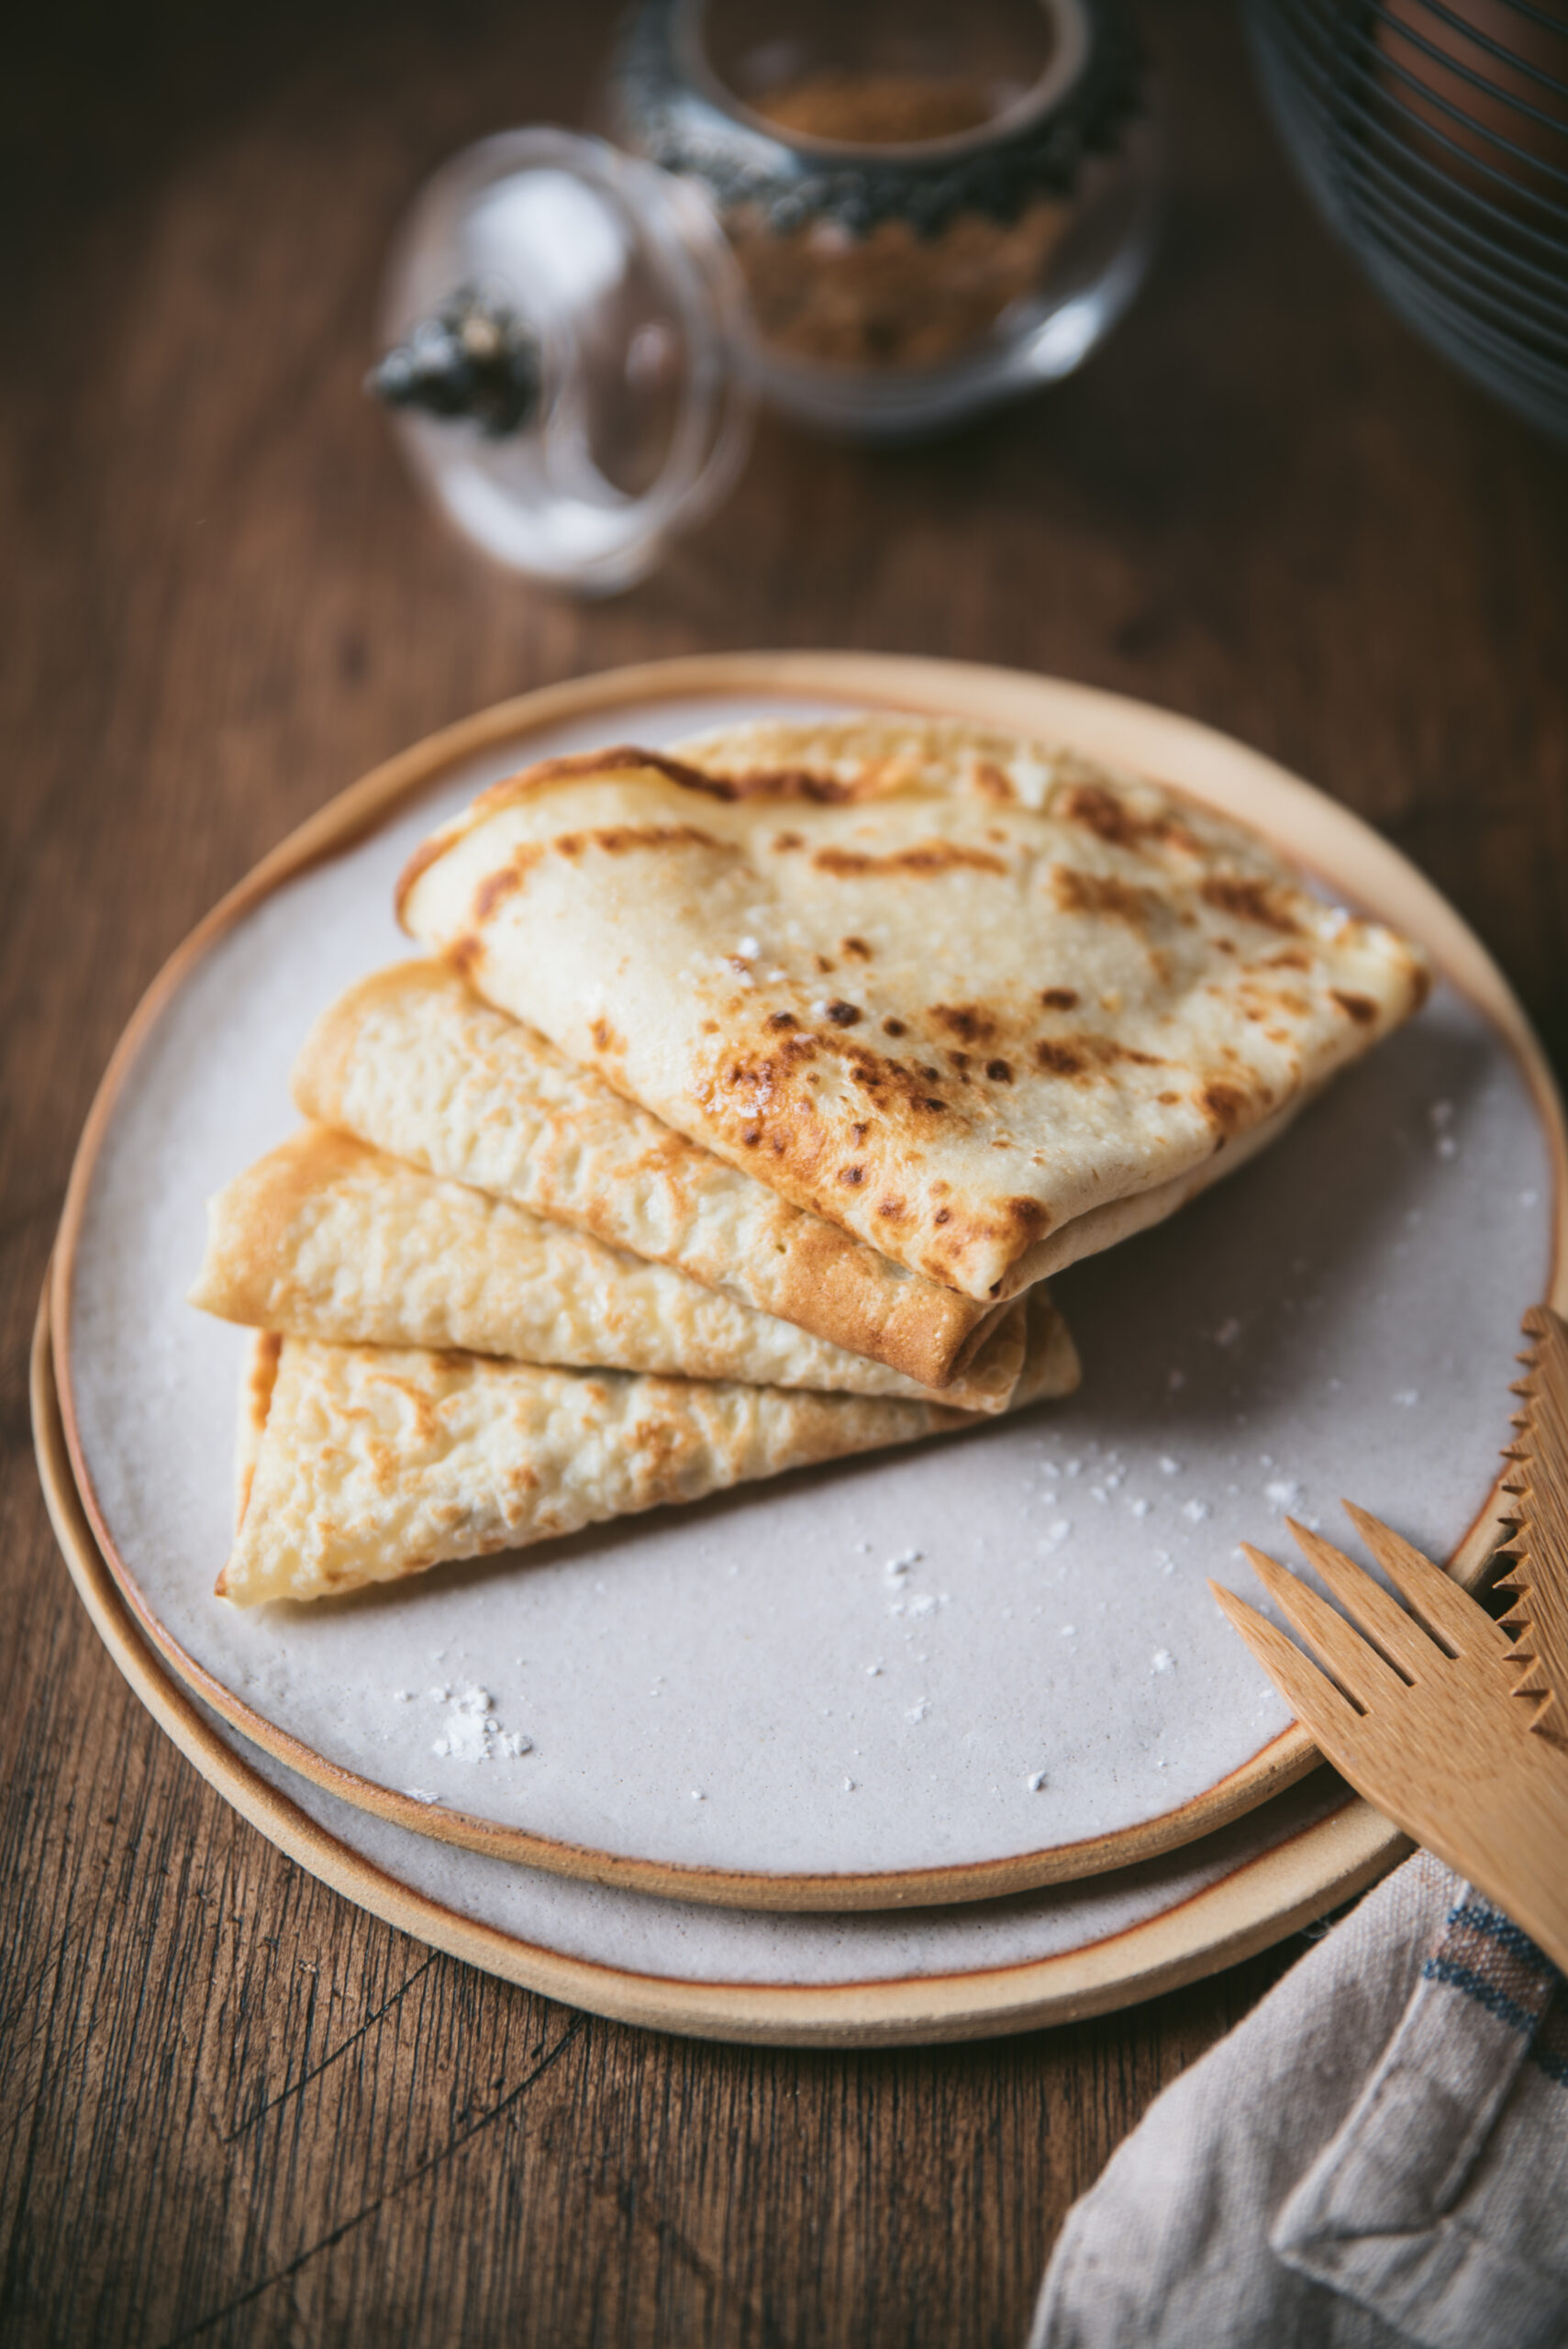 Best French Crepes Recipe